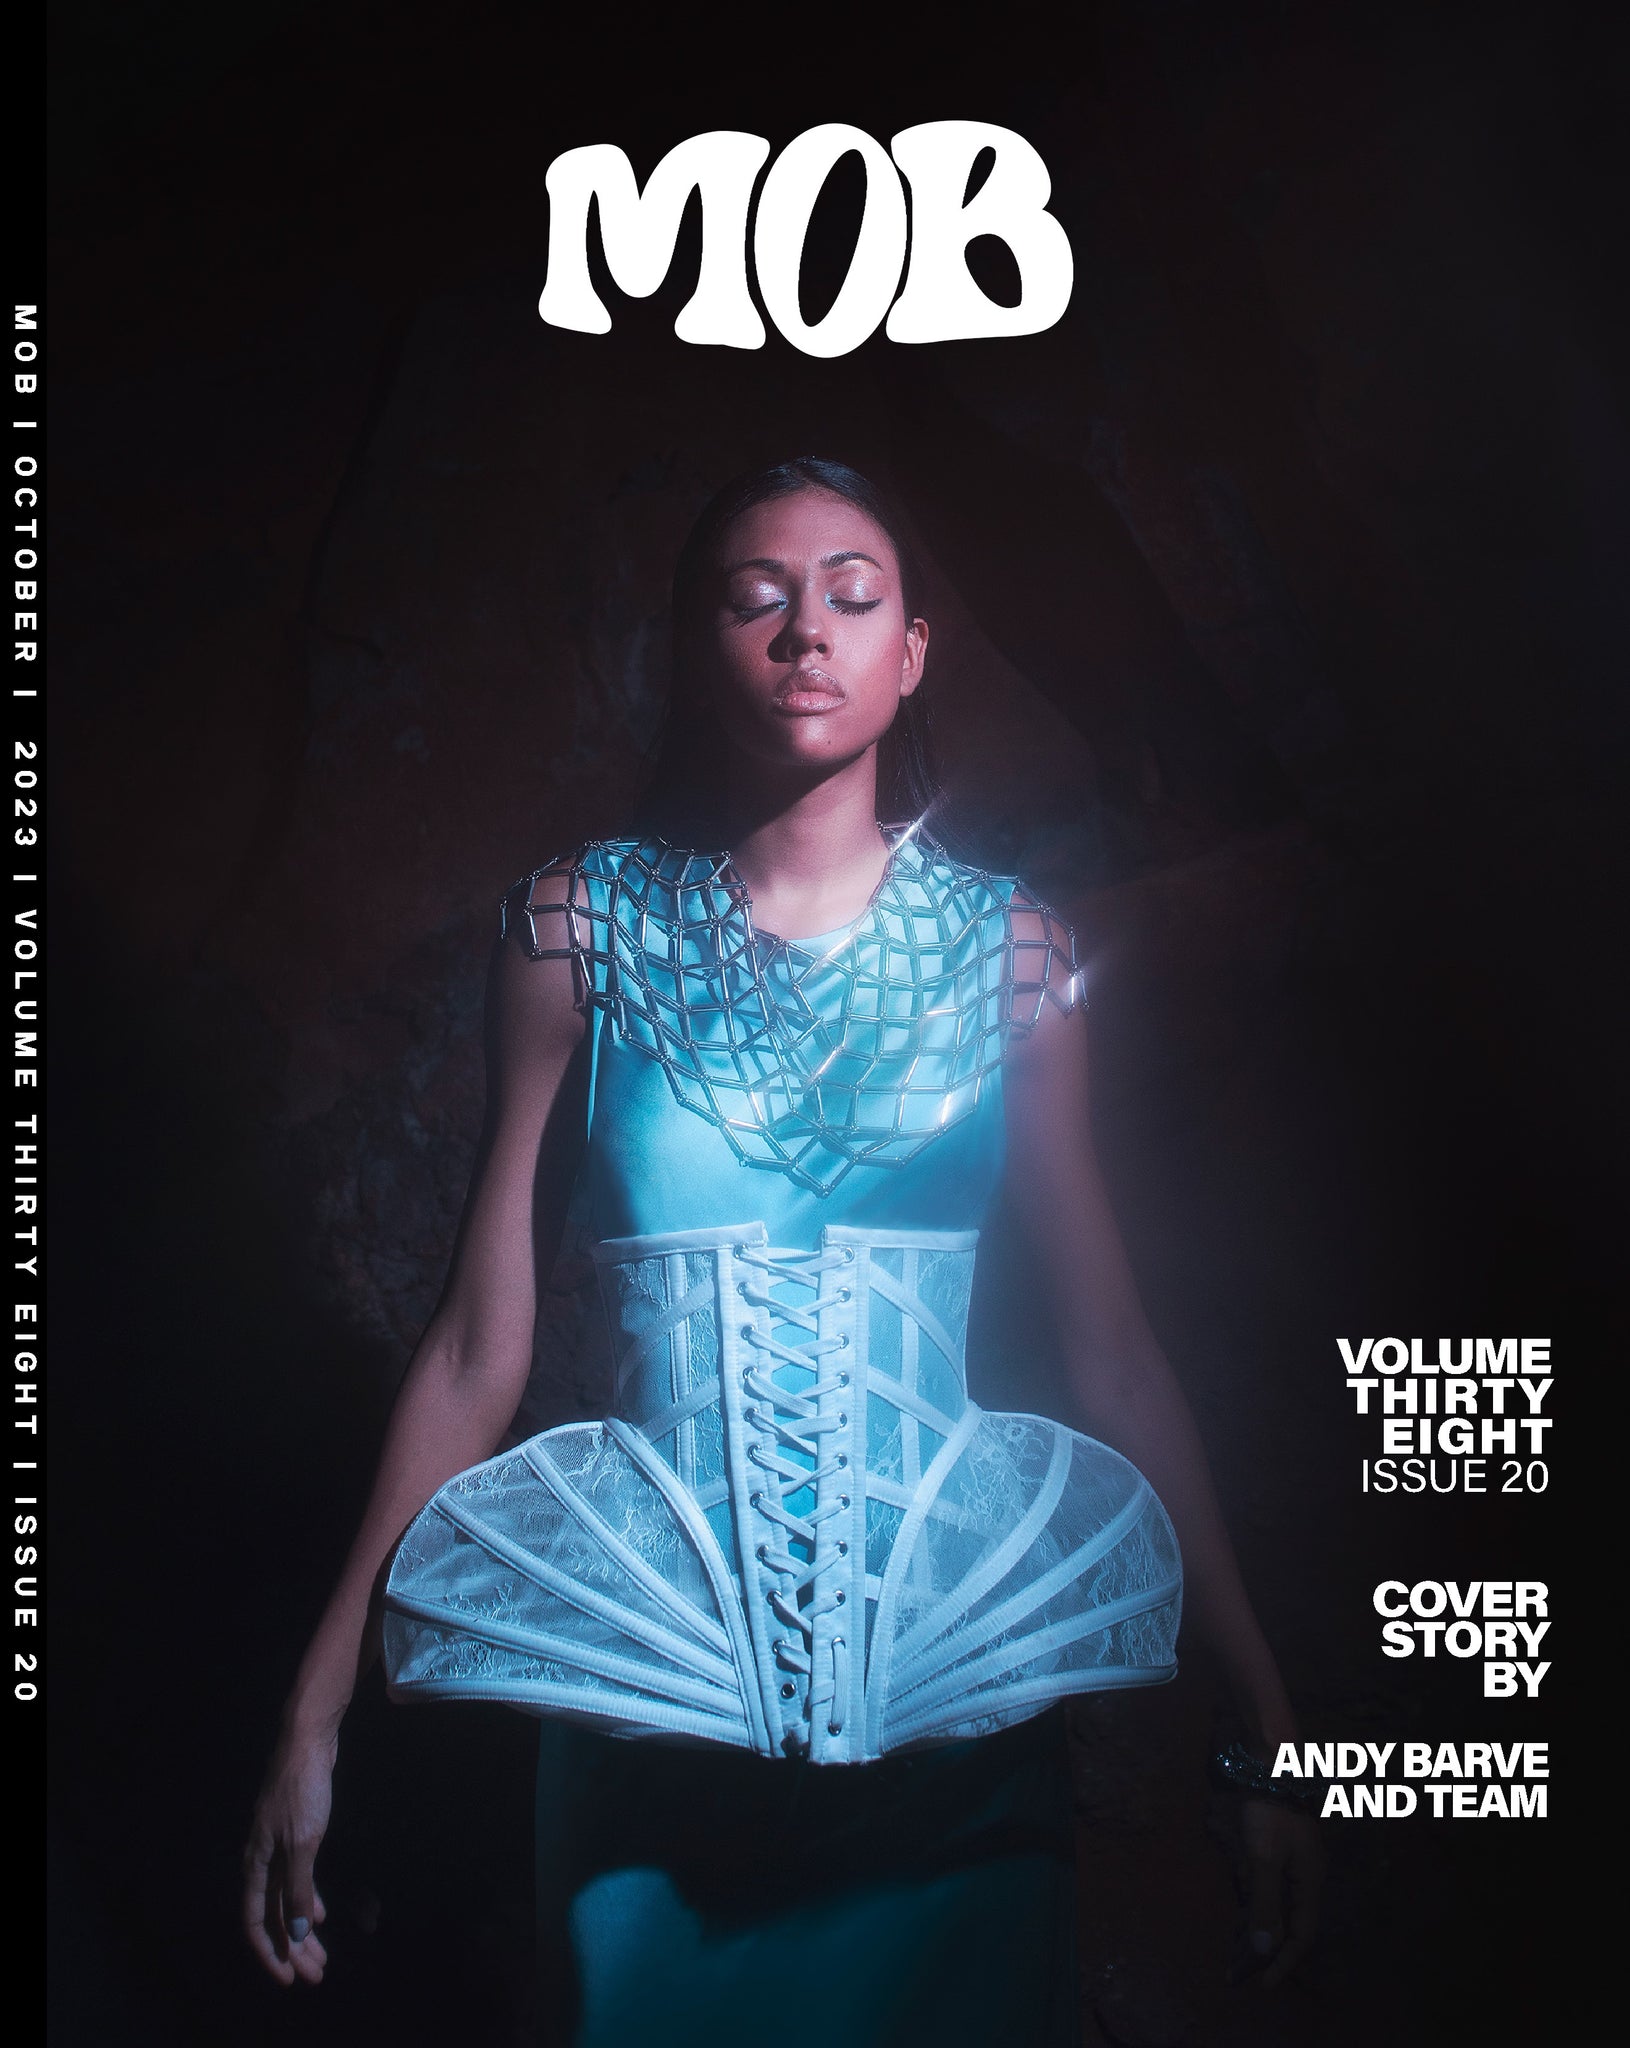 MOB JOURNAL | VOLUME THIRTY EIGHT | ISSUE #20